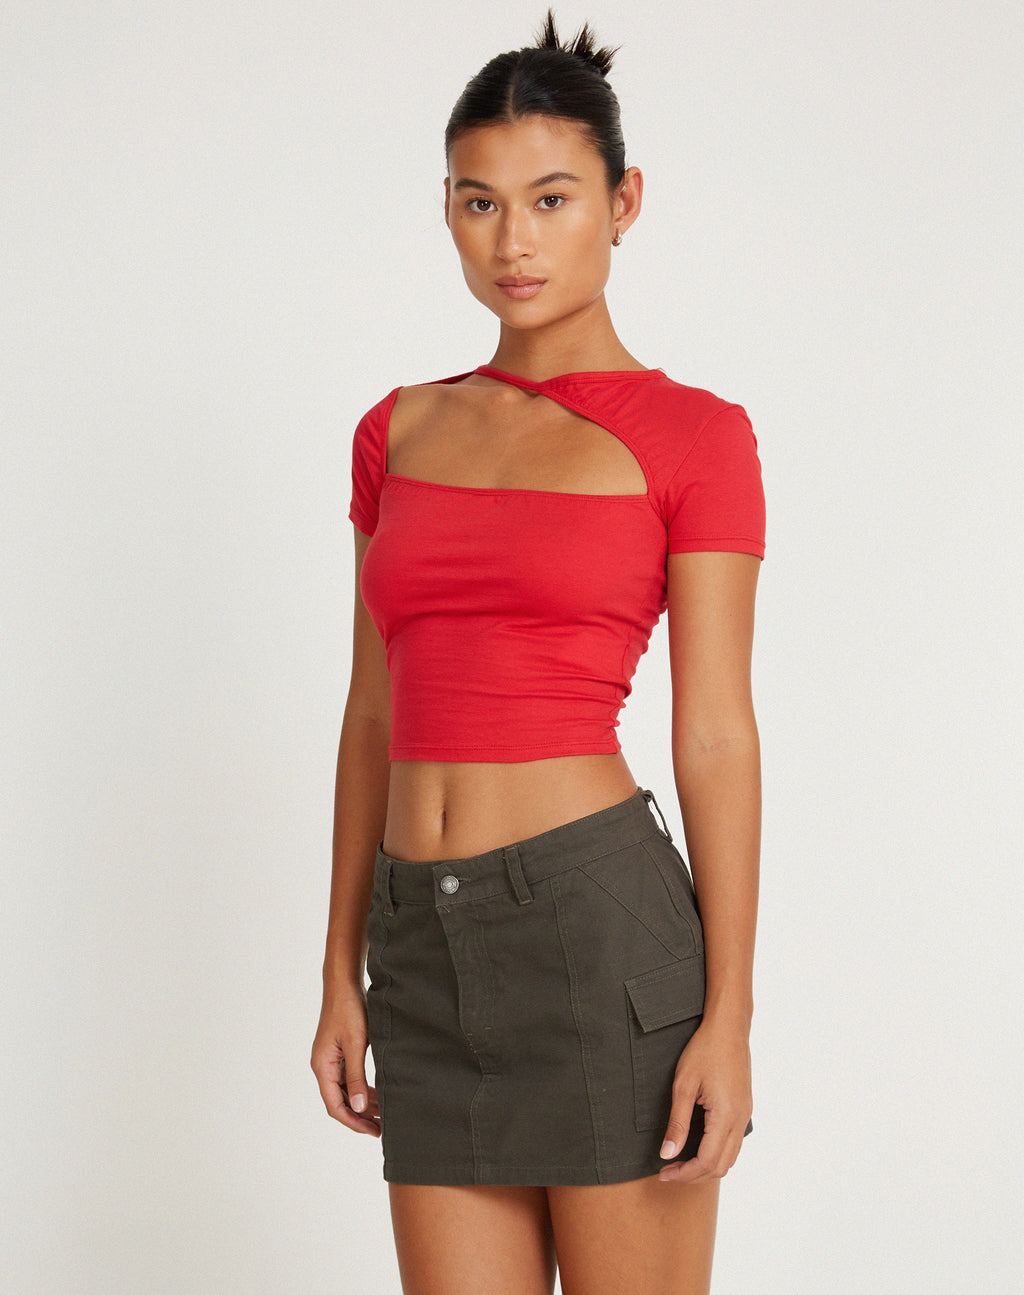 Long Sleeve Fitted Crop Top in Red Dahlia